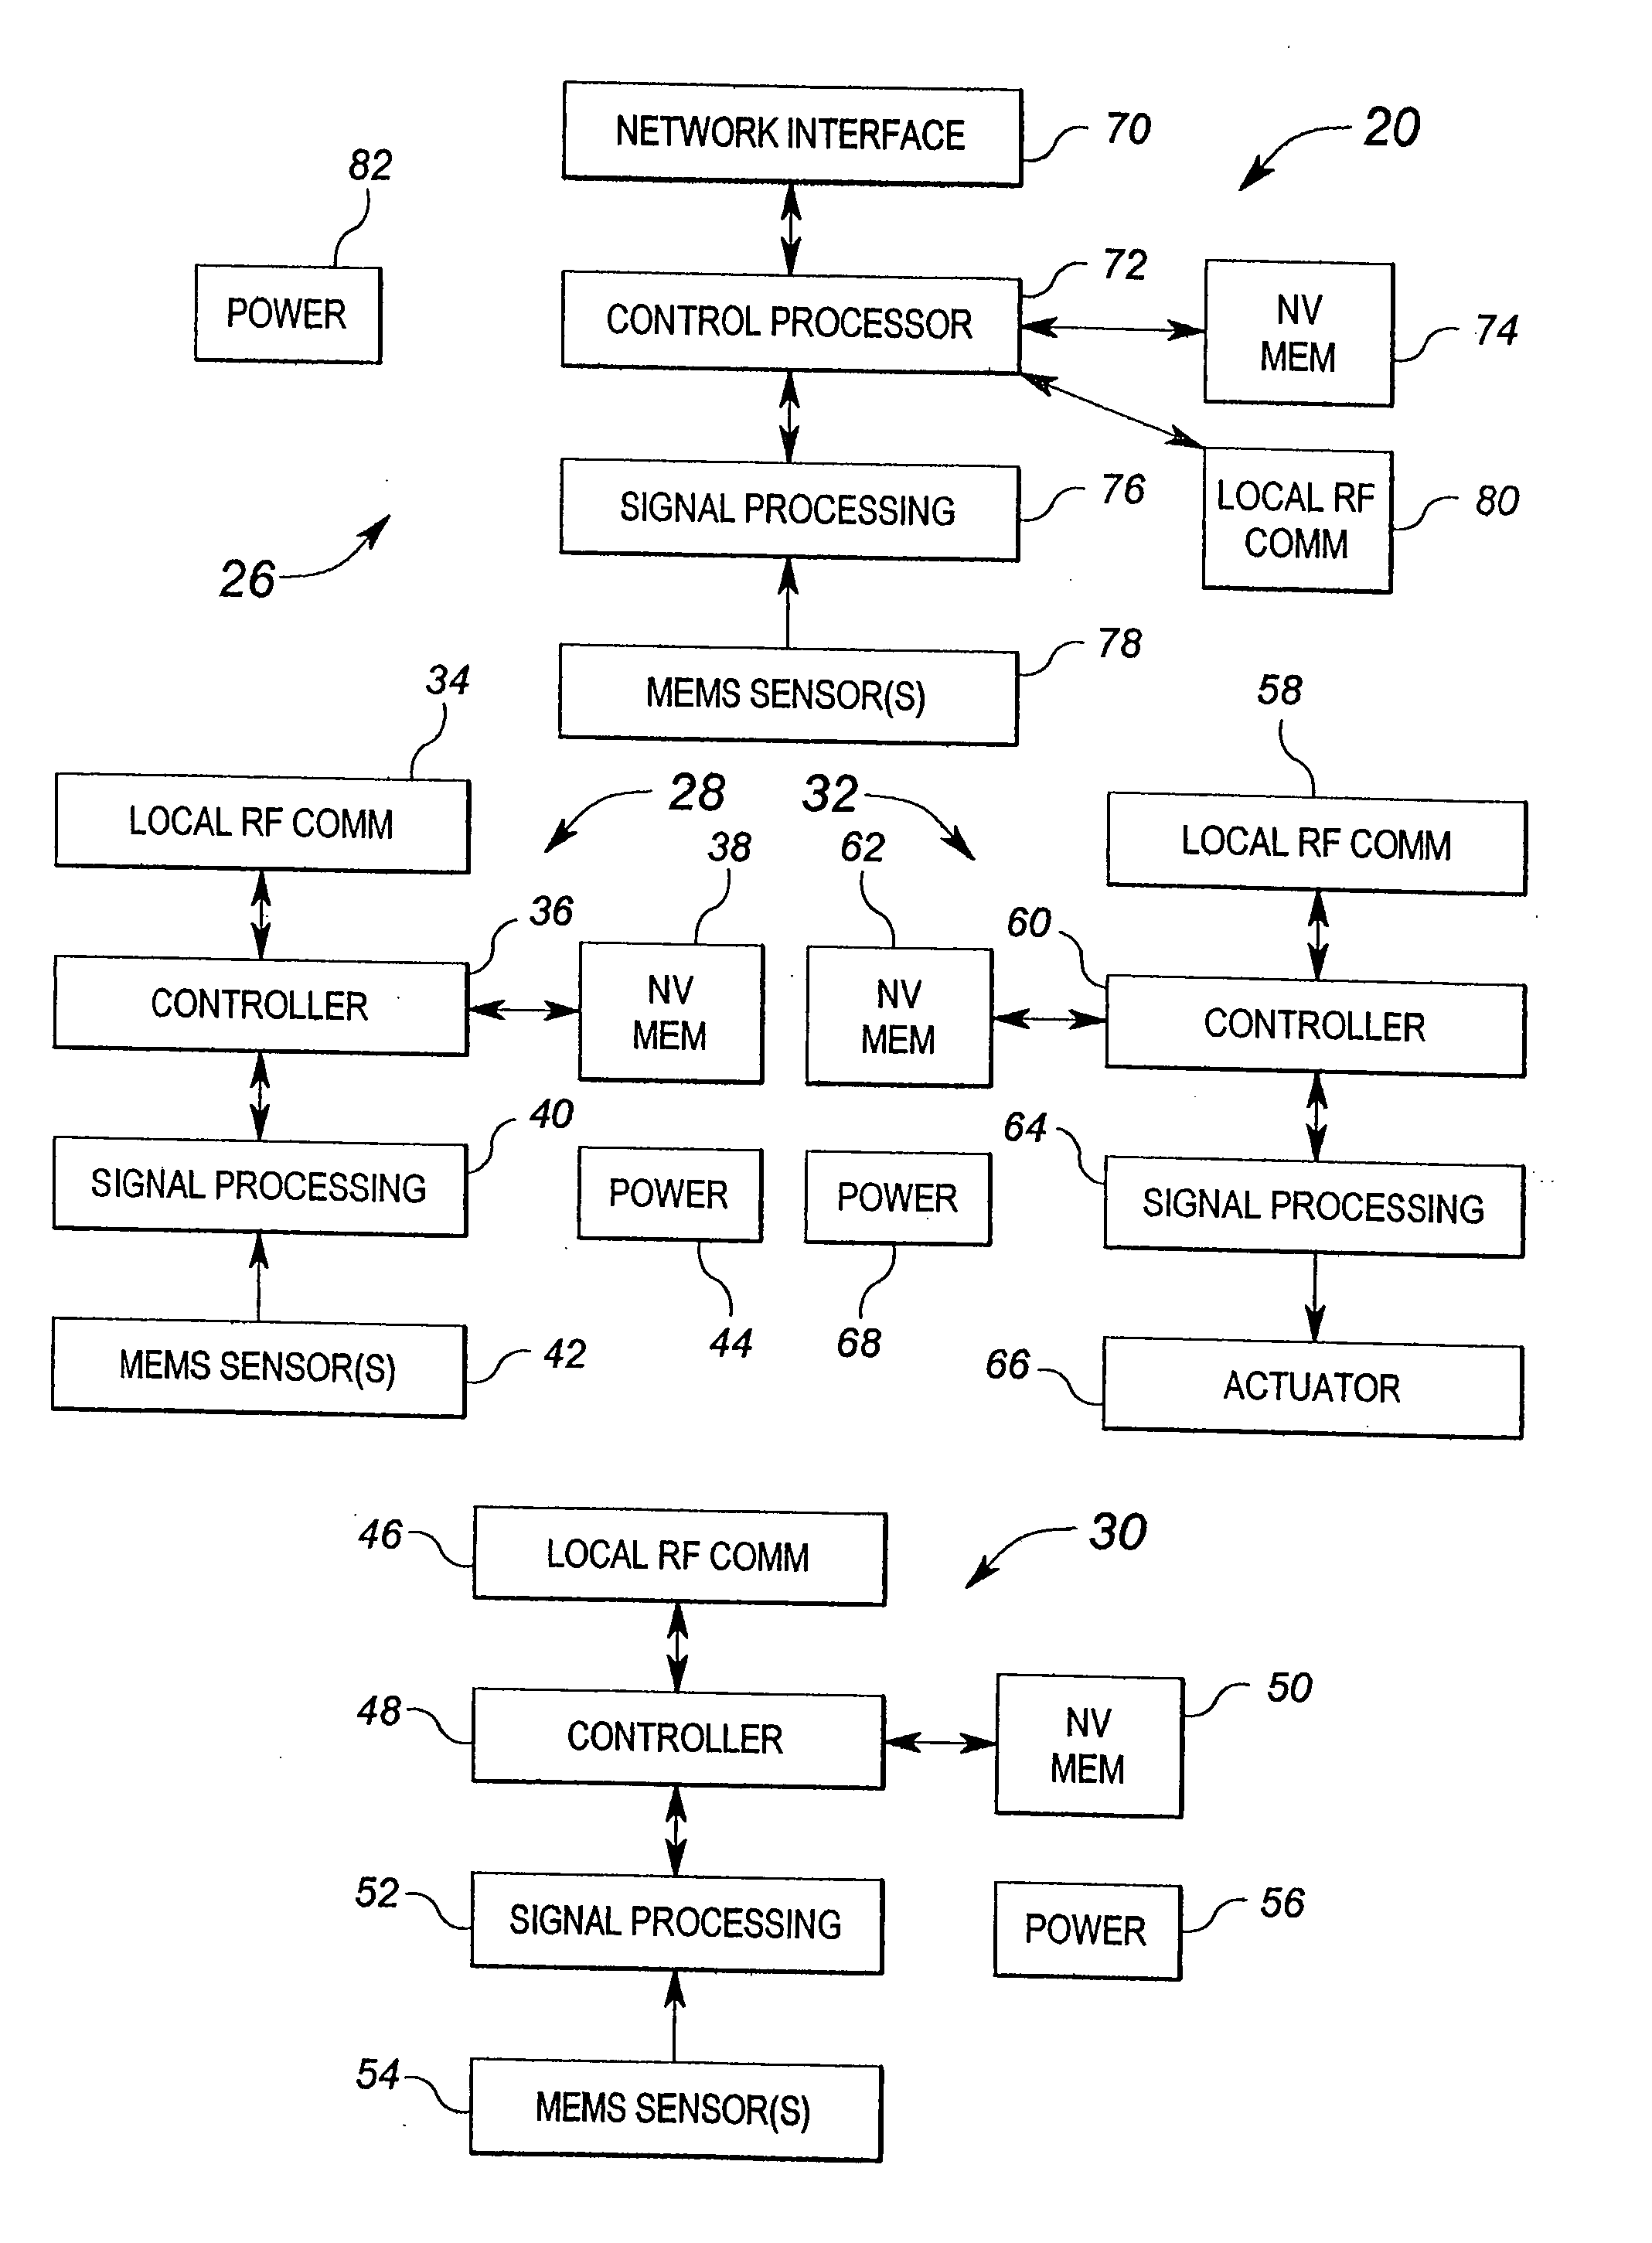 Method and apparatus for controlling building component characteristics